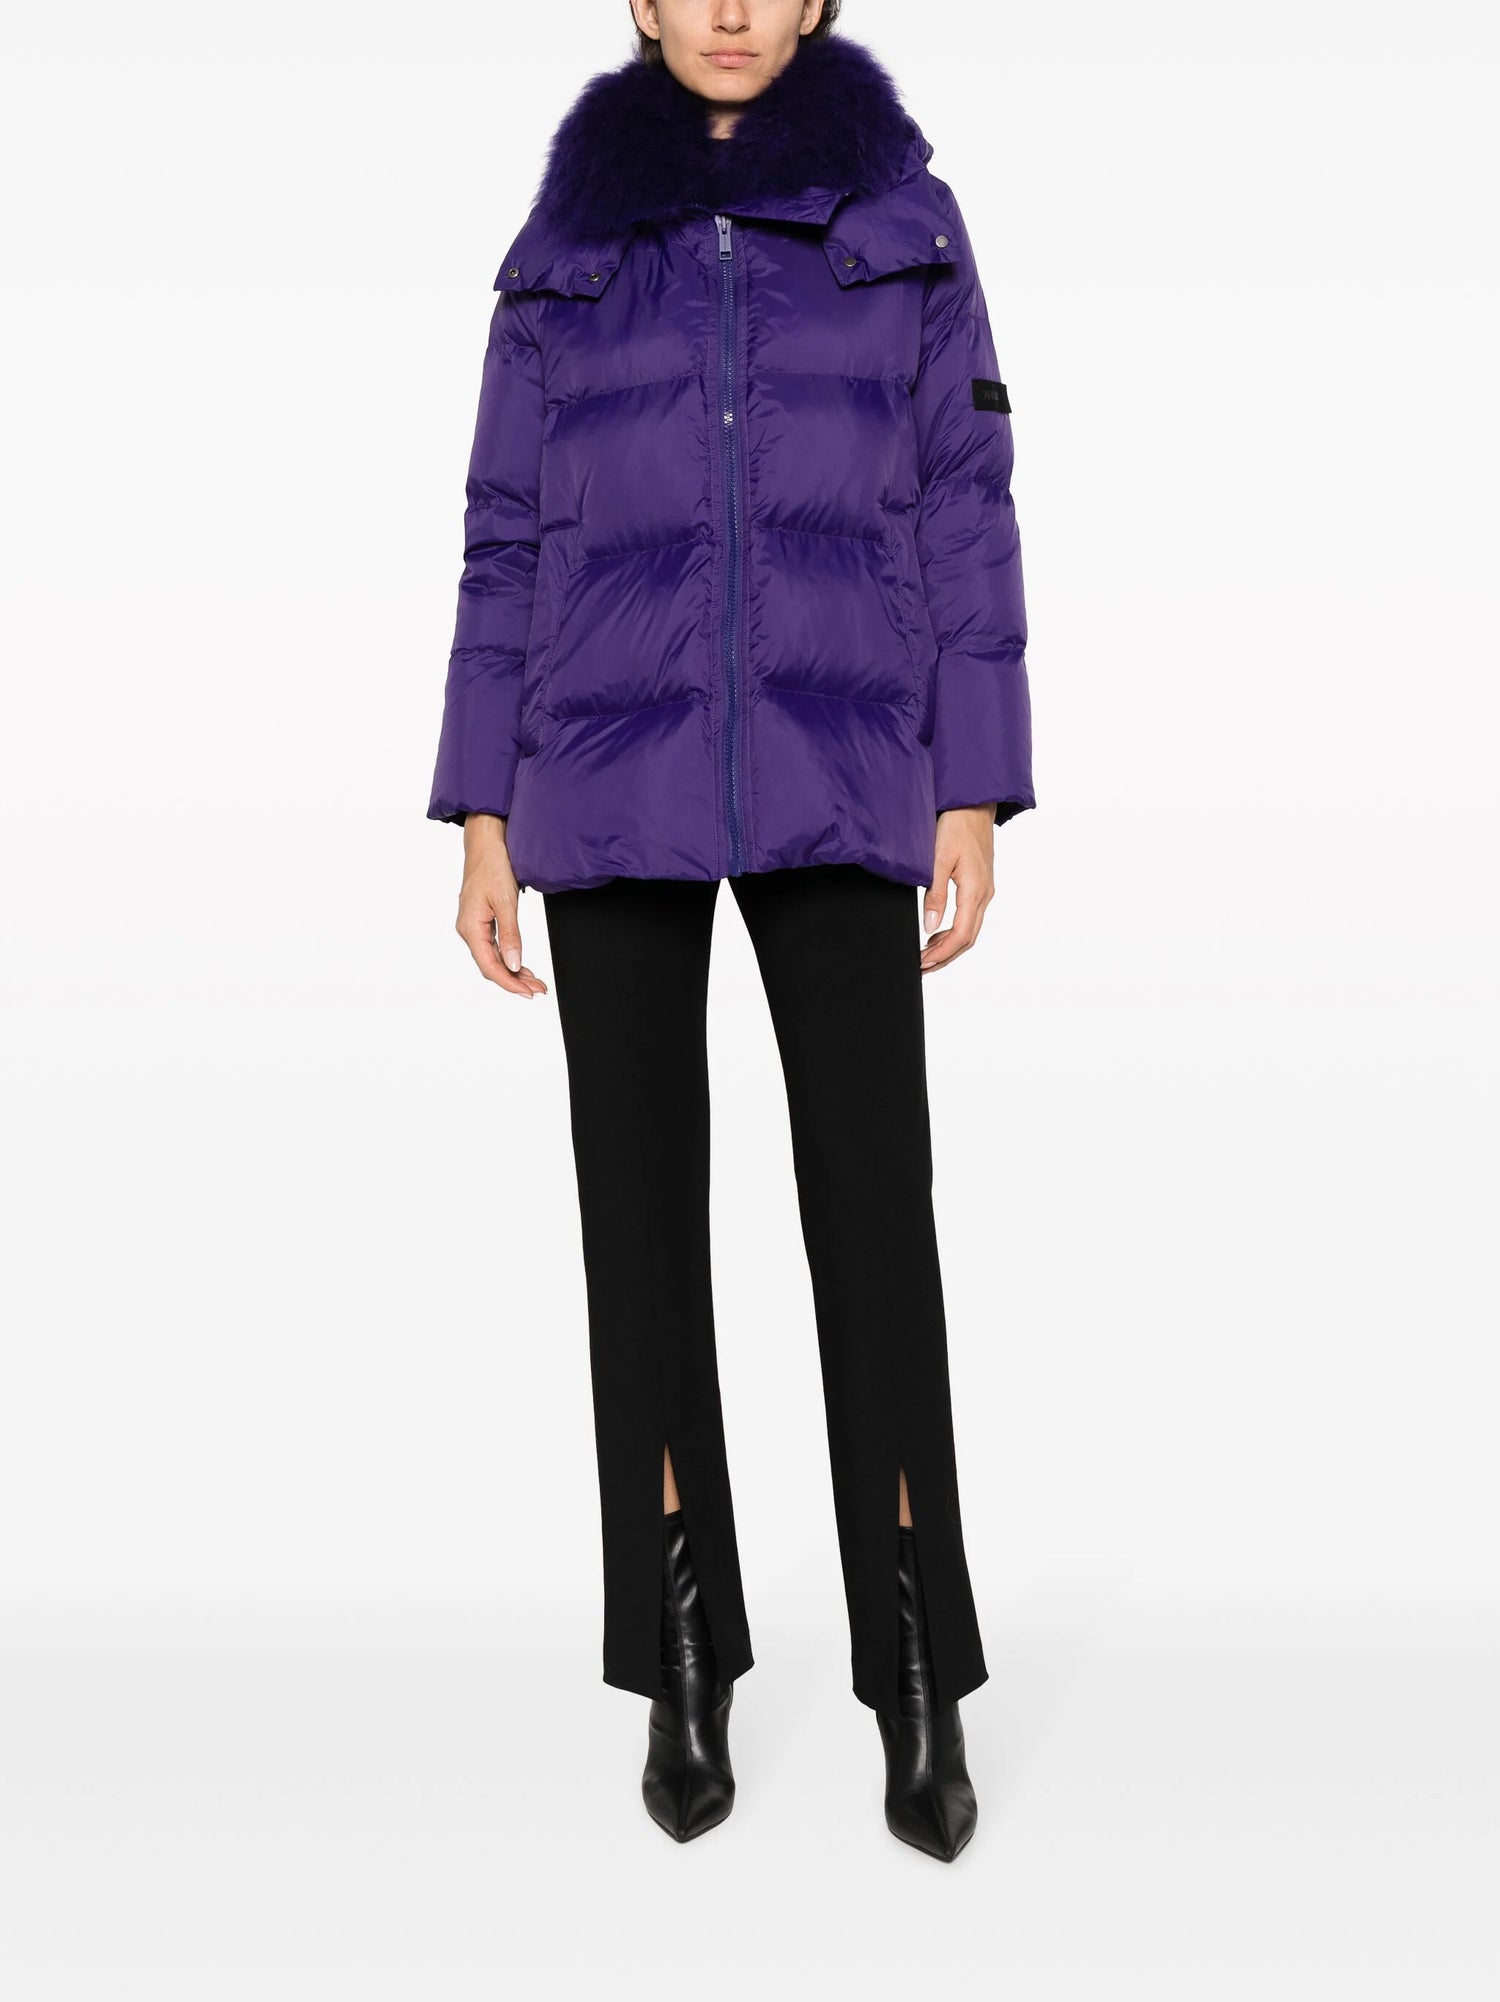 DOWN COAT TECHNICAL FABRIC, violet